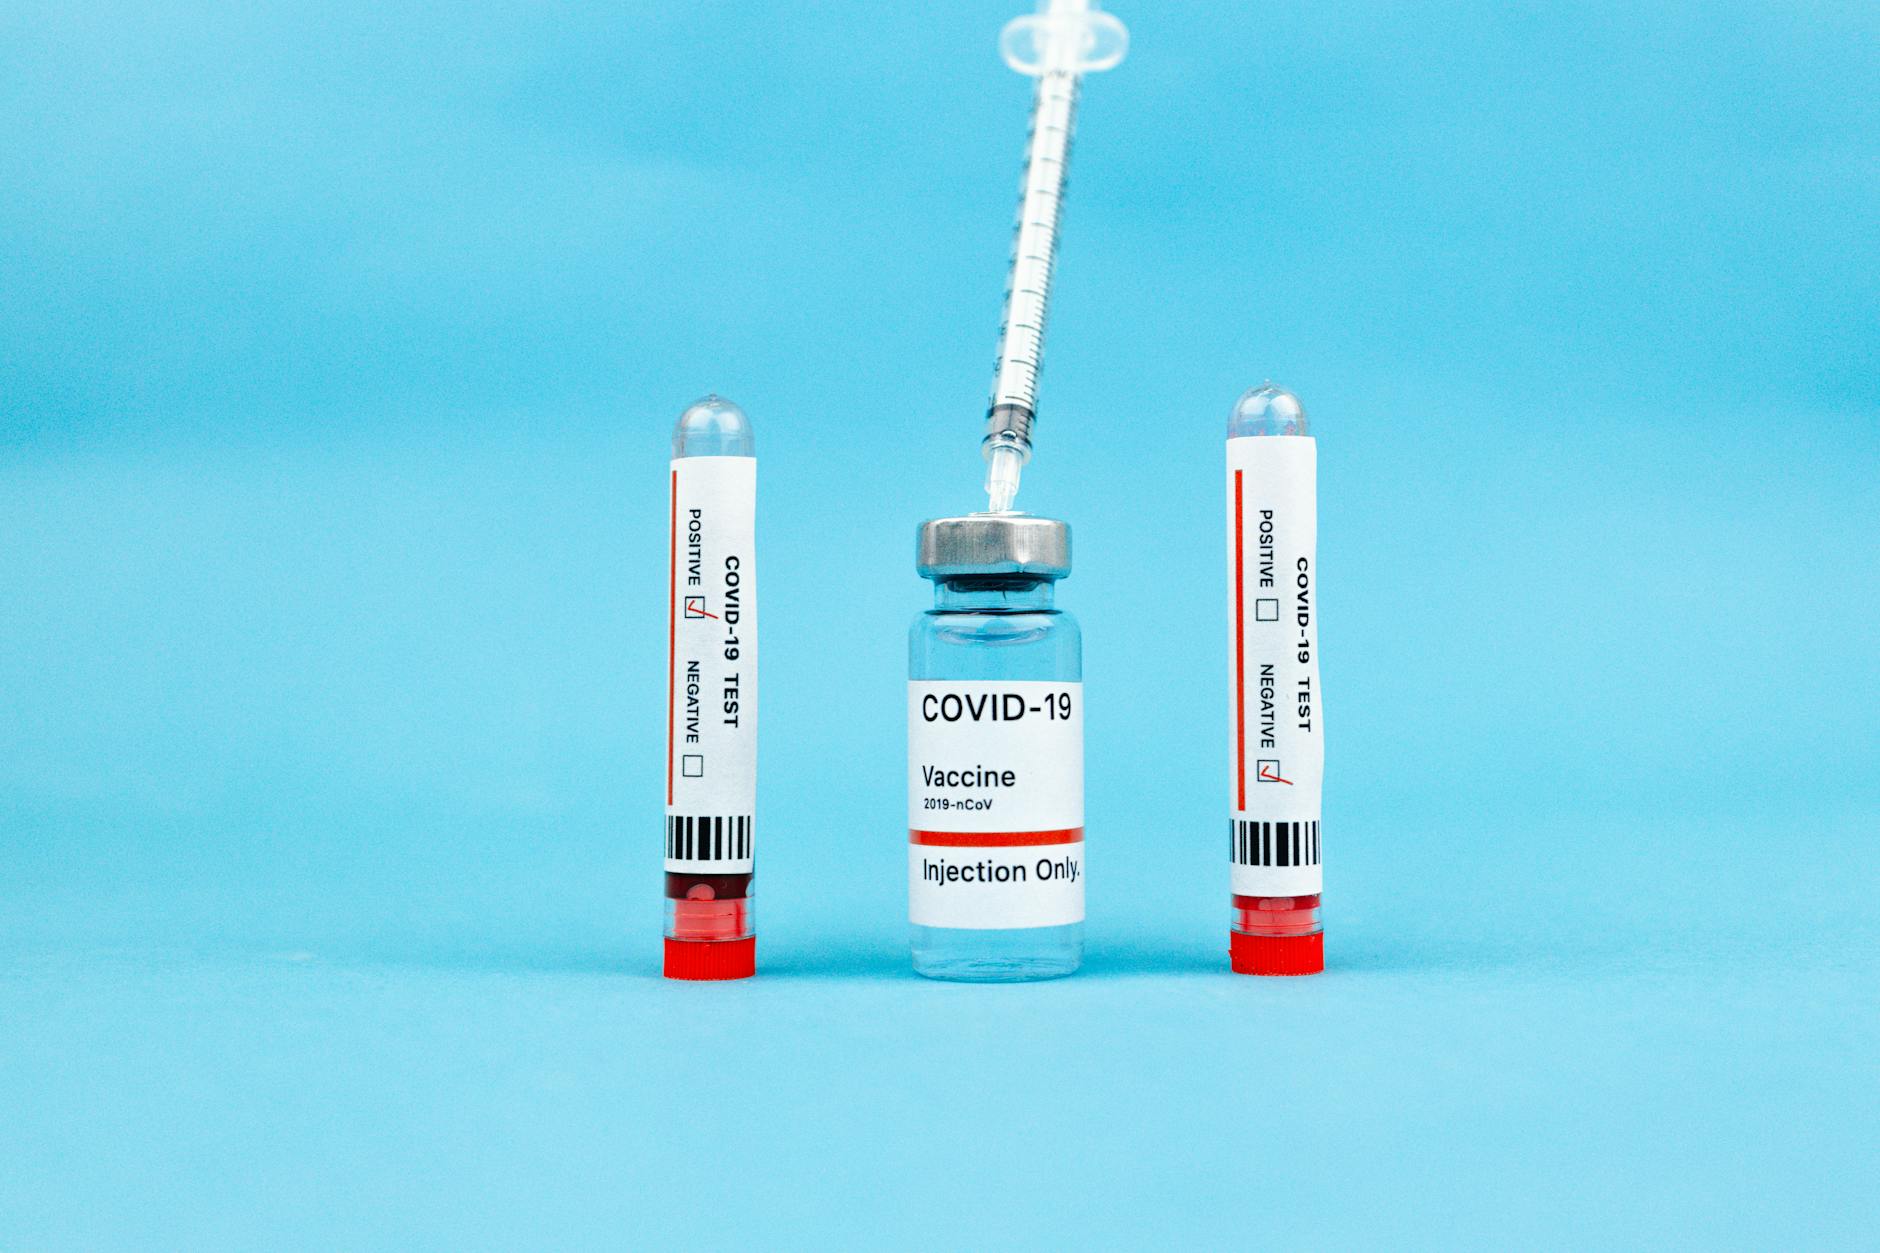 Vaccine Ampoule and Test Tubes on Blue Surface